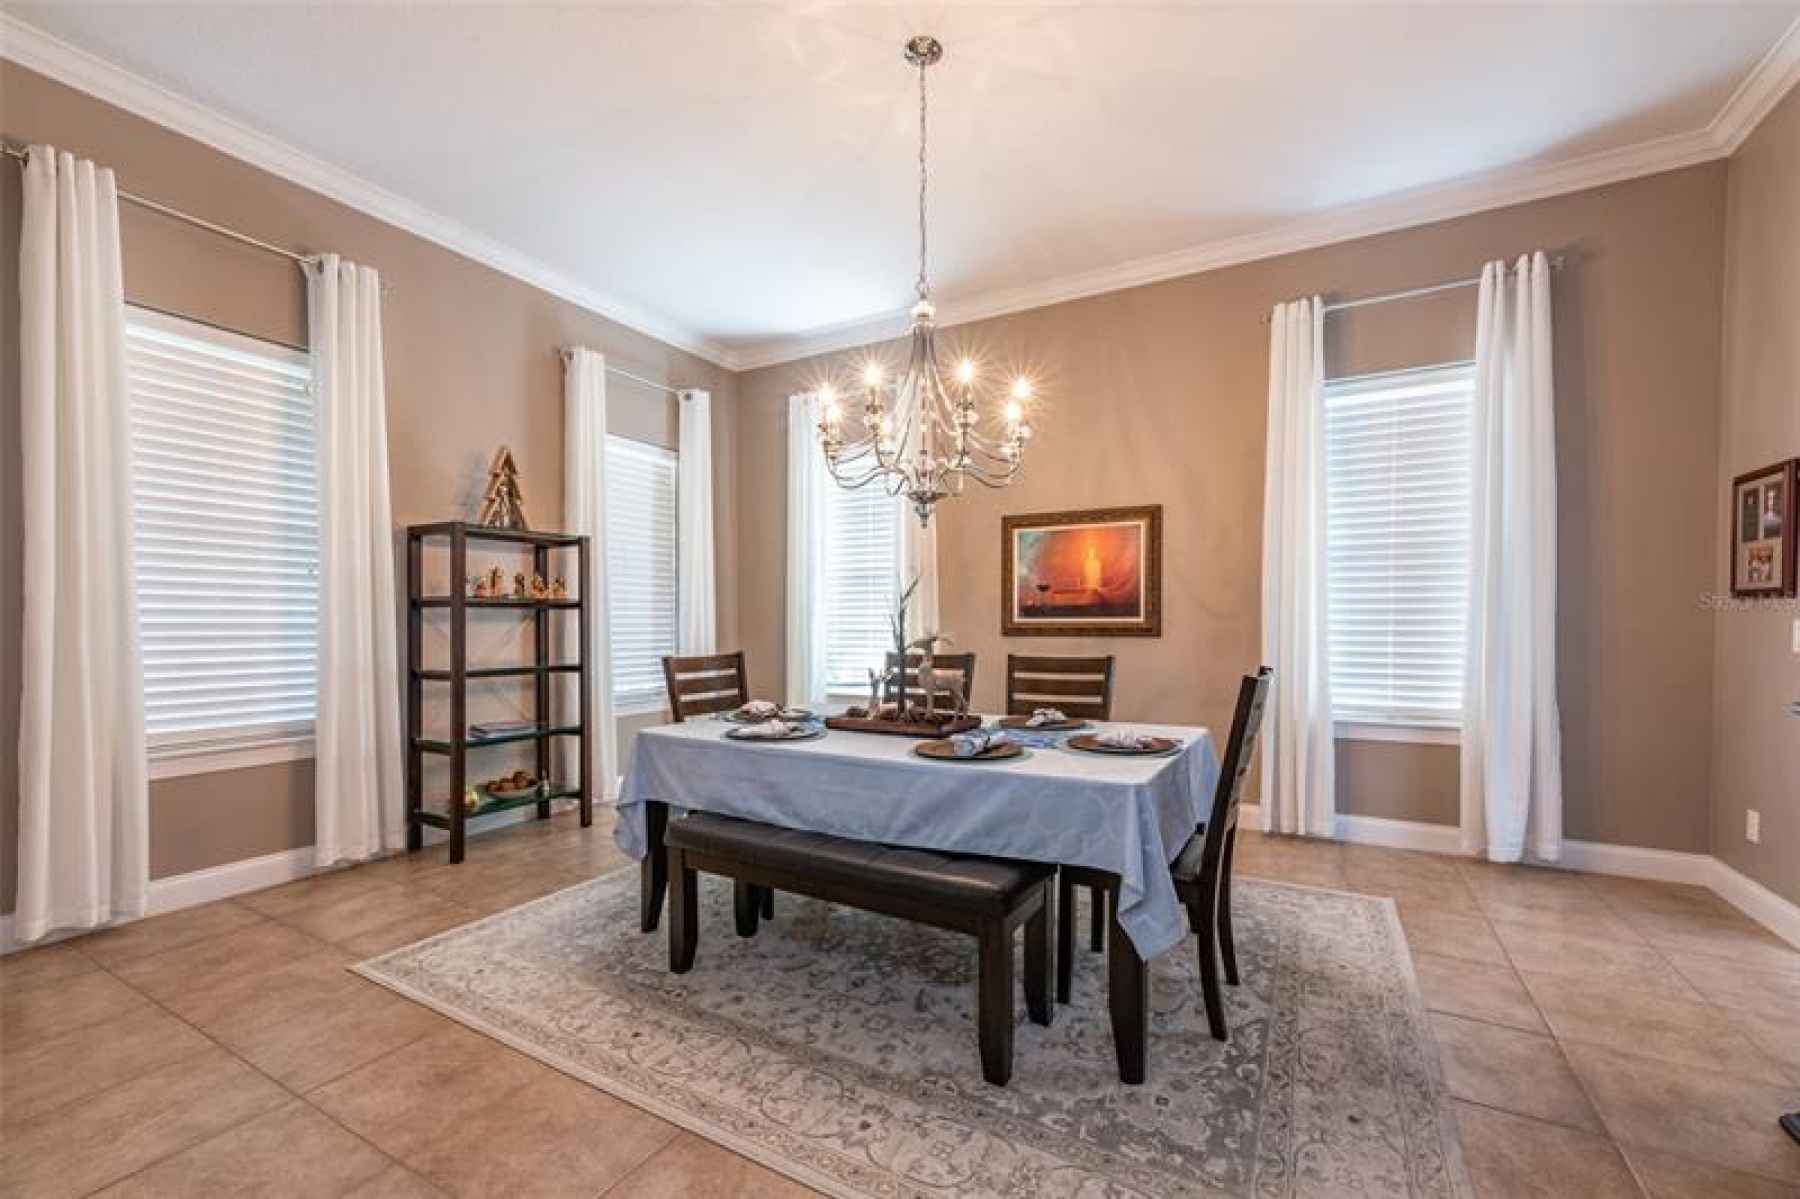 Beautiful formal dining room large enough for entire extended family or entertain your friends measu